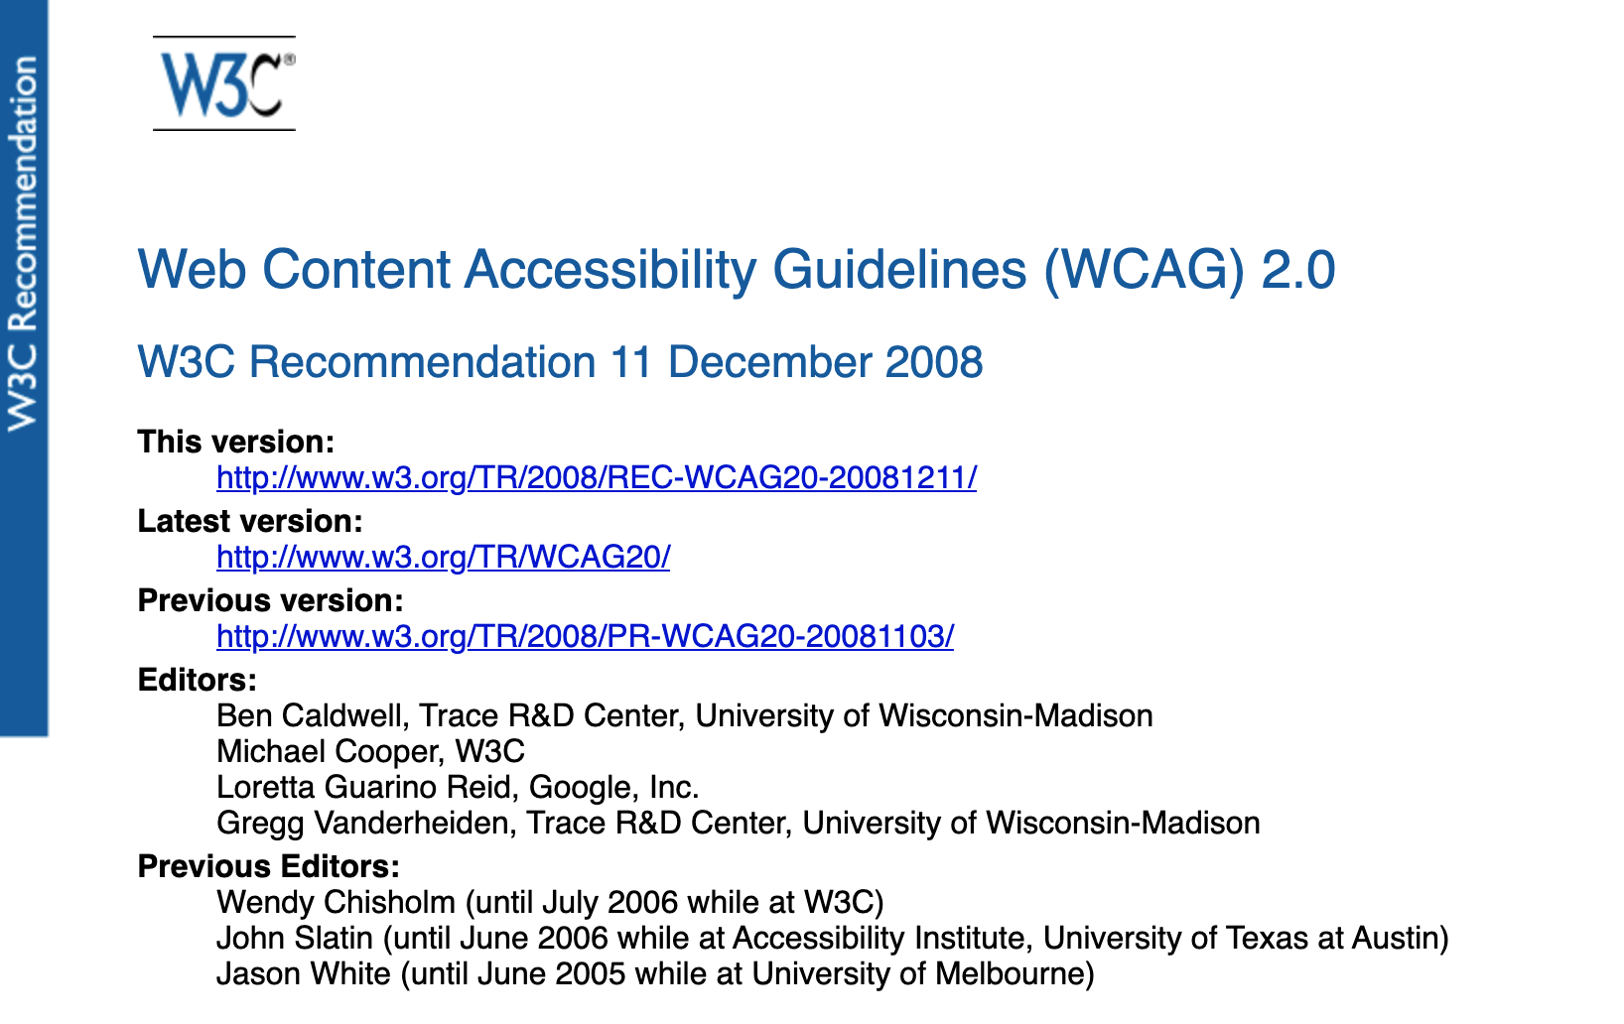 Web Content Accessibility Guidelines 2.0 front page